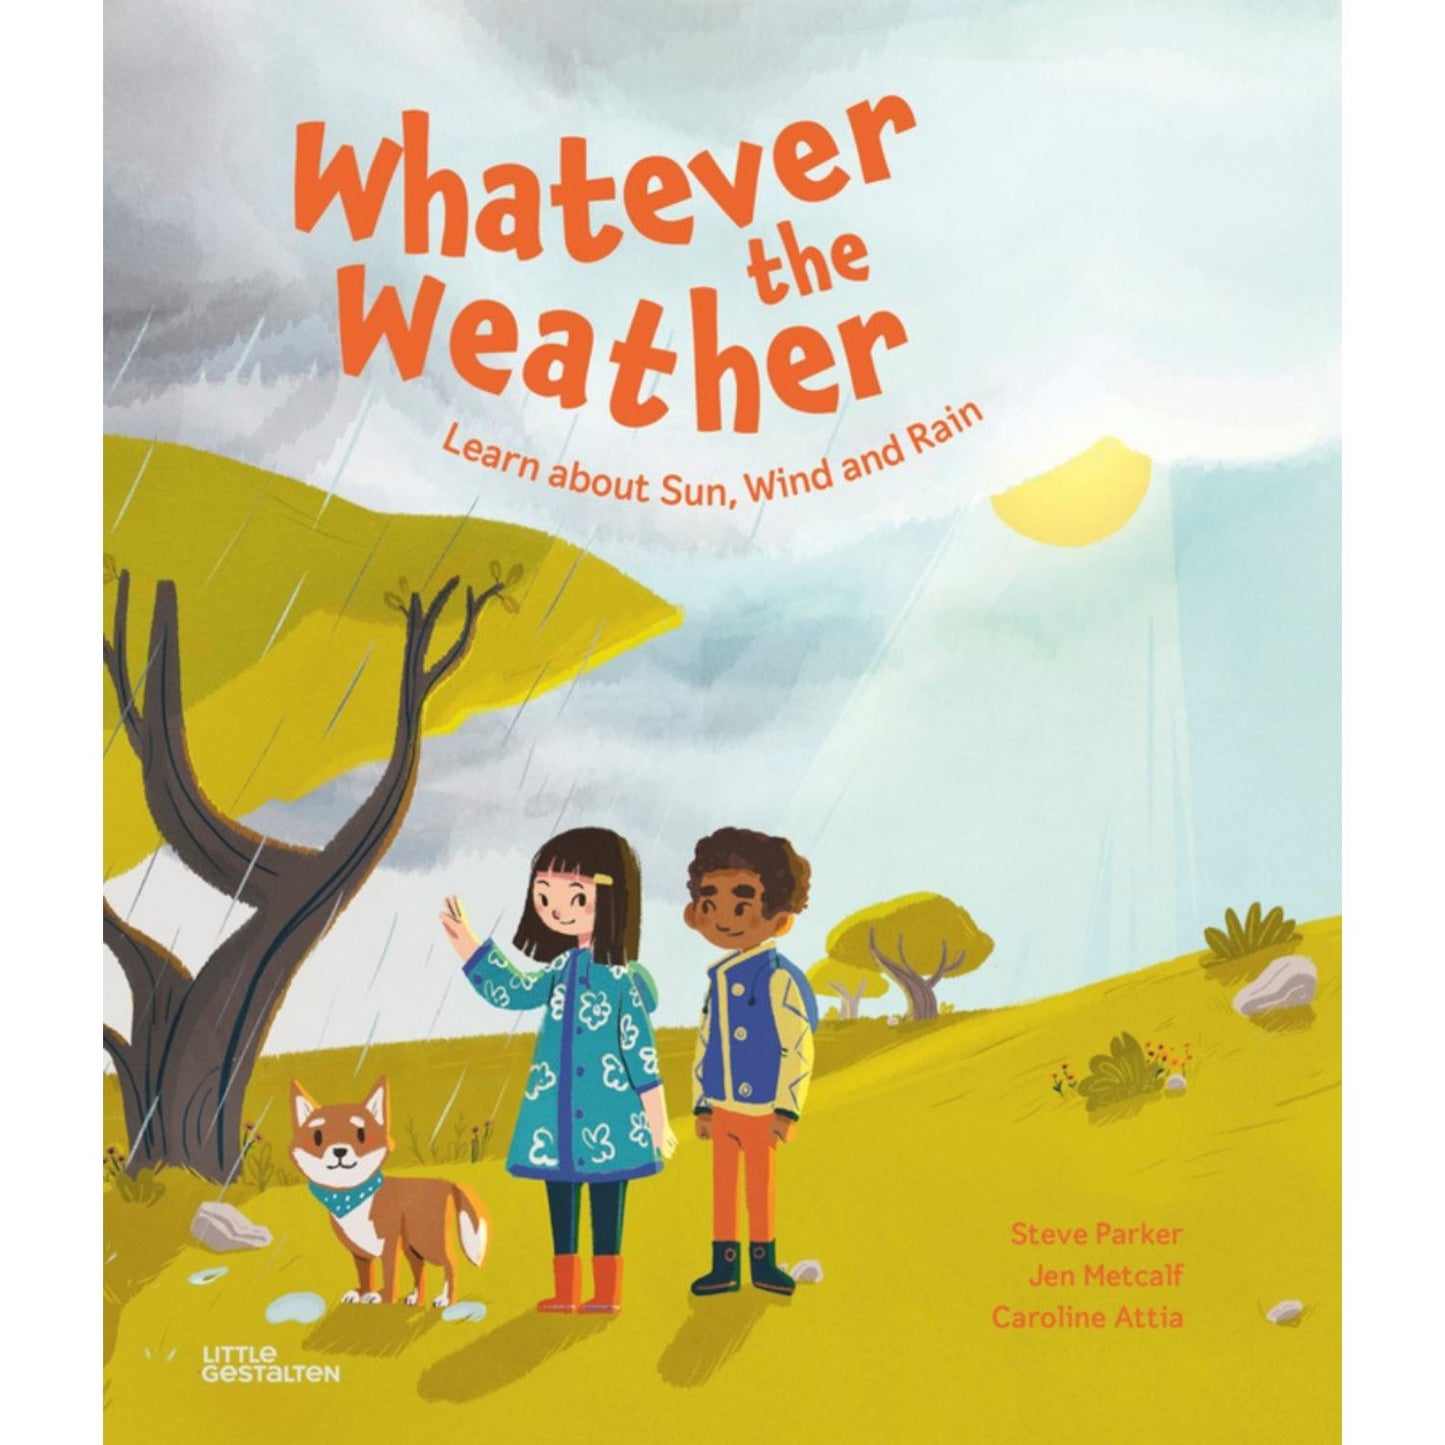 Whatever the Weather: Learn about Sun, Wind and Rain | Children’s Book on Weather